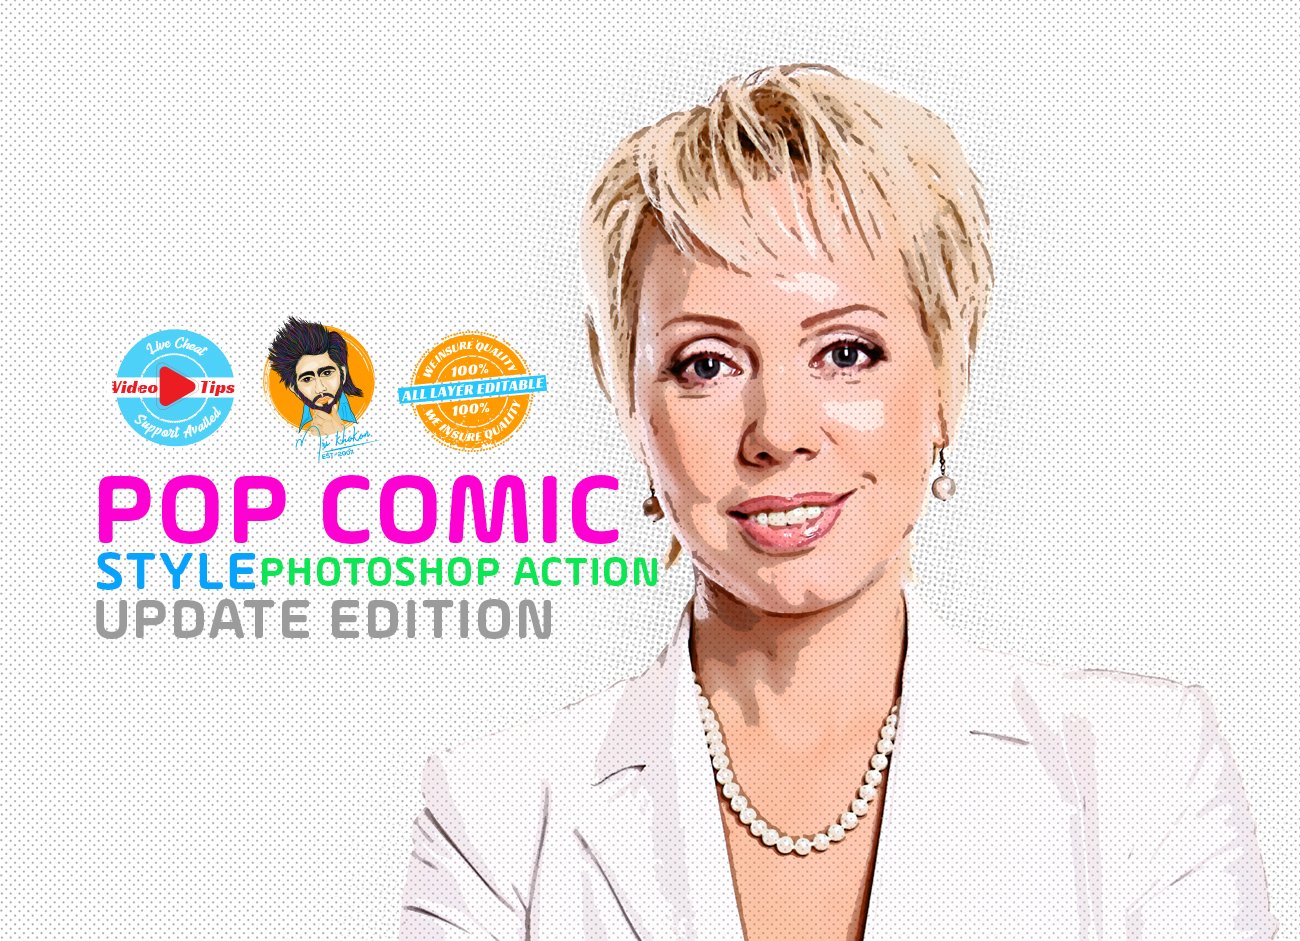 Pop Comic Style Photoshop Actioncover image.